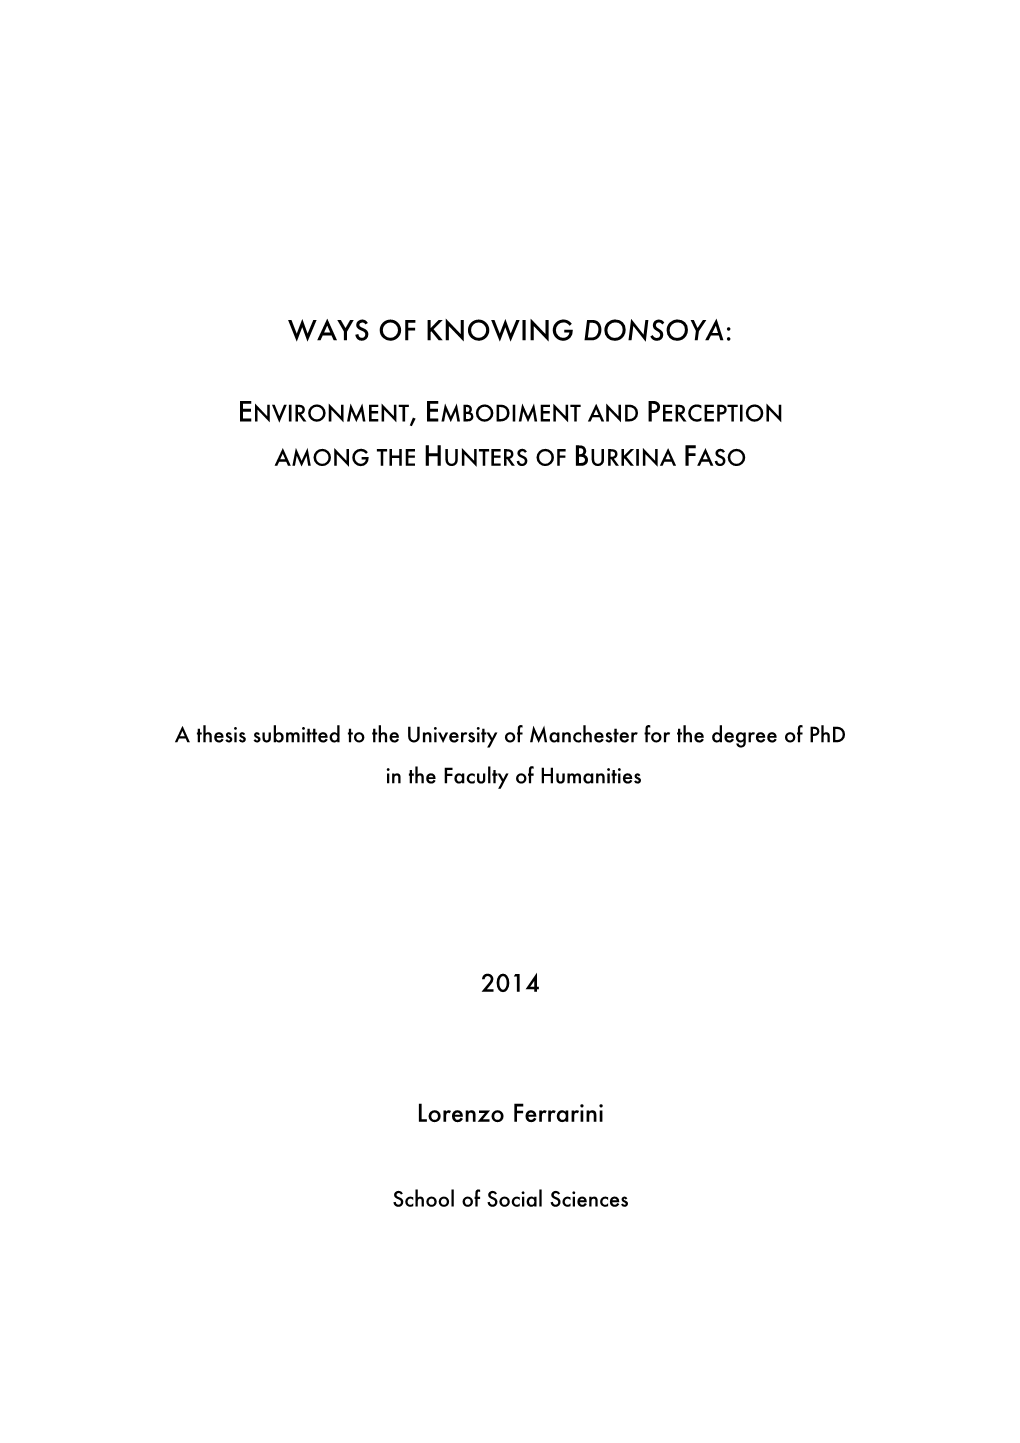 Ways of Knowing Donsoya: Environment, Embodiment and Perception Among the Hunters of Burkina Faso